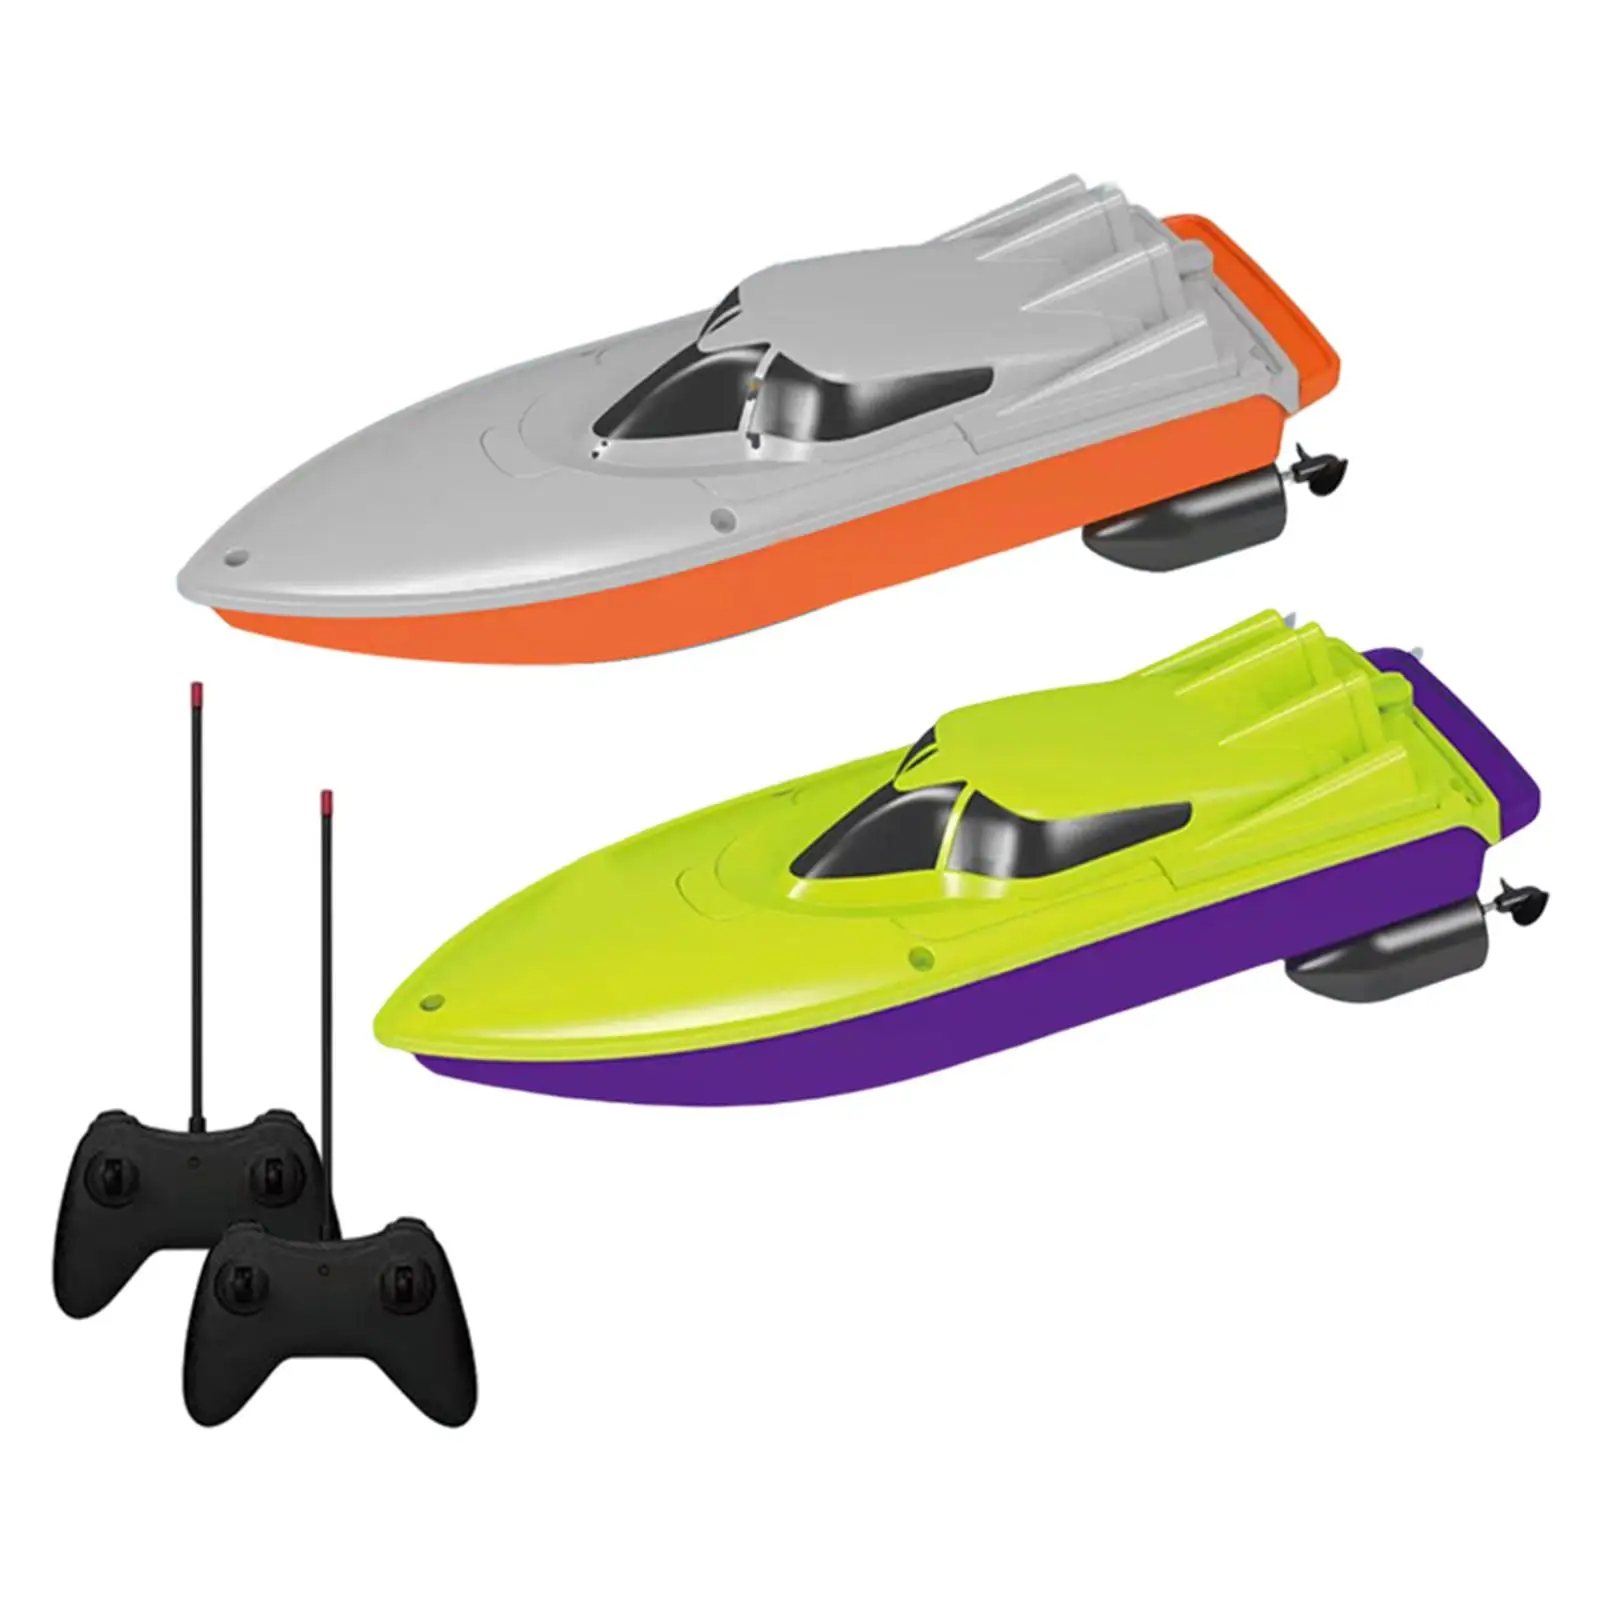 2.4G RC Boat Waterproof High RC Race Boat 10+ MPH Double Motor Remote Control Boat for Kids and Adults, River, Lakes,